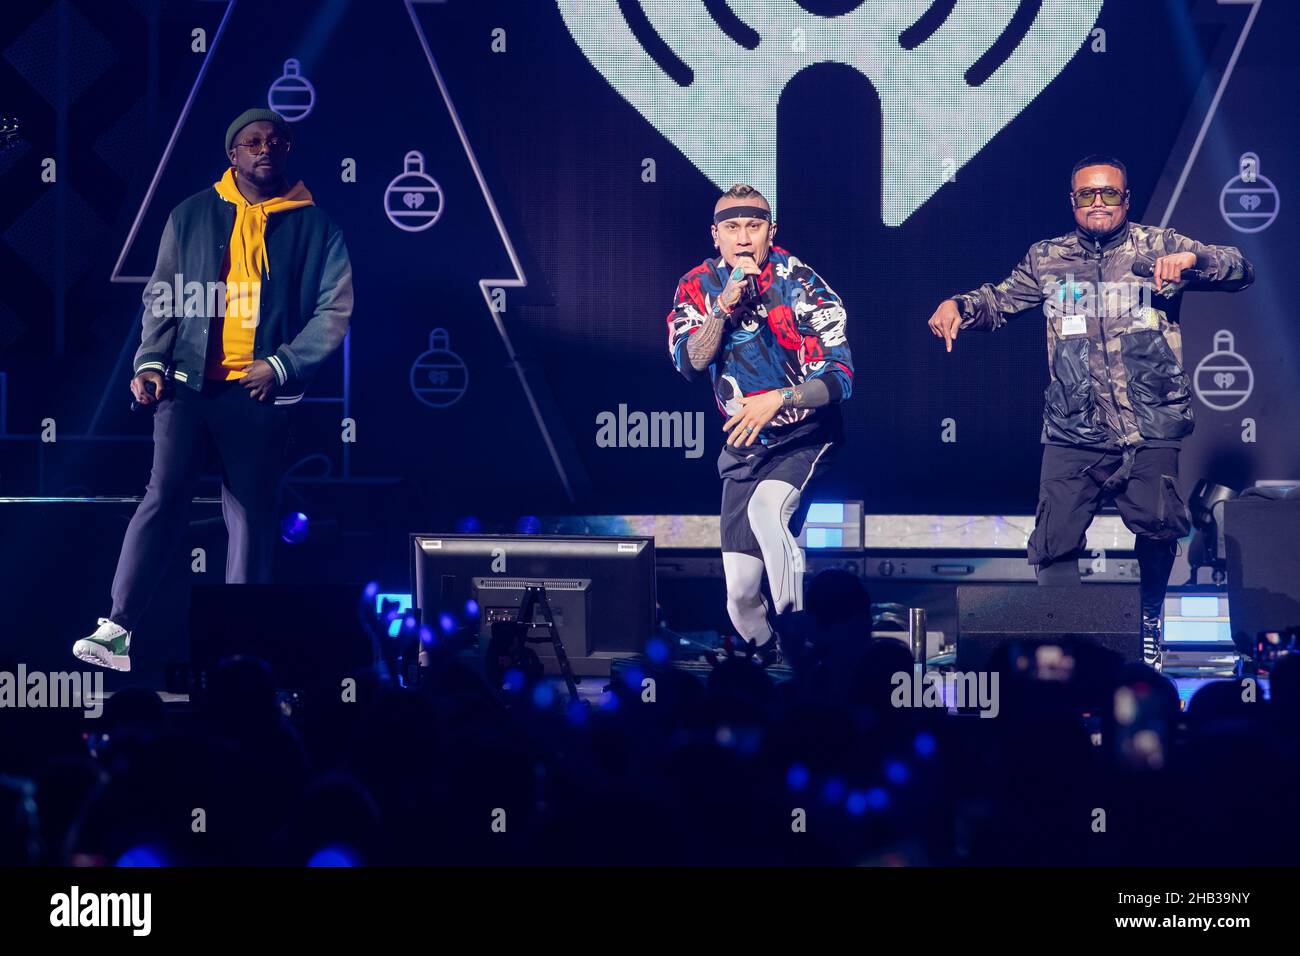 December 14, 2021, Washington, D.C, USA: WILL.I.AM, TABOO and APL.DE.AP of the Black Eyed Peas perform at the Hot 99.5 Jingle Ball at Capital One Arena in Washington, D.C. (Credit Image: © Kyle Gustafson/ZUMA Press Wire) Stock Photo